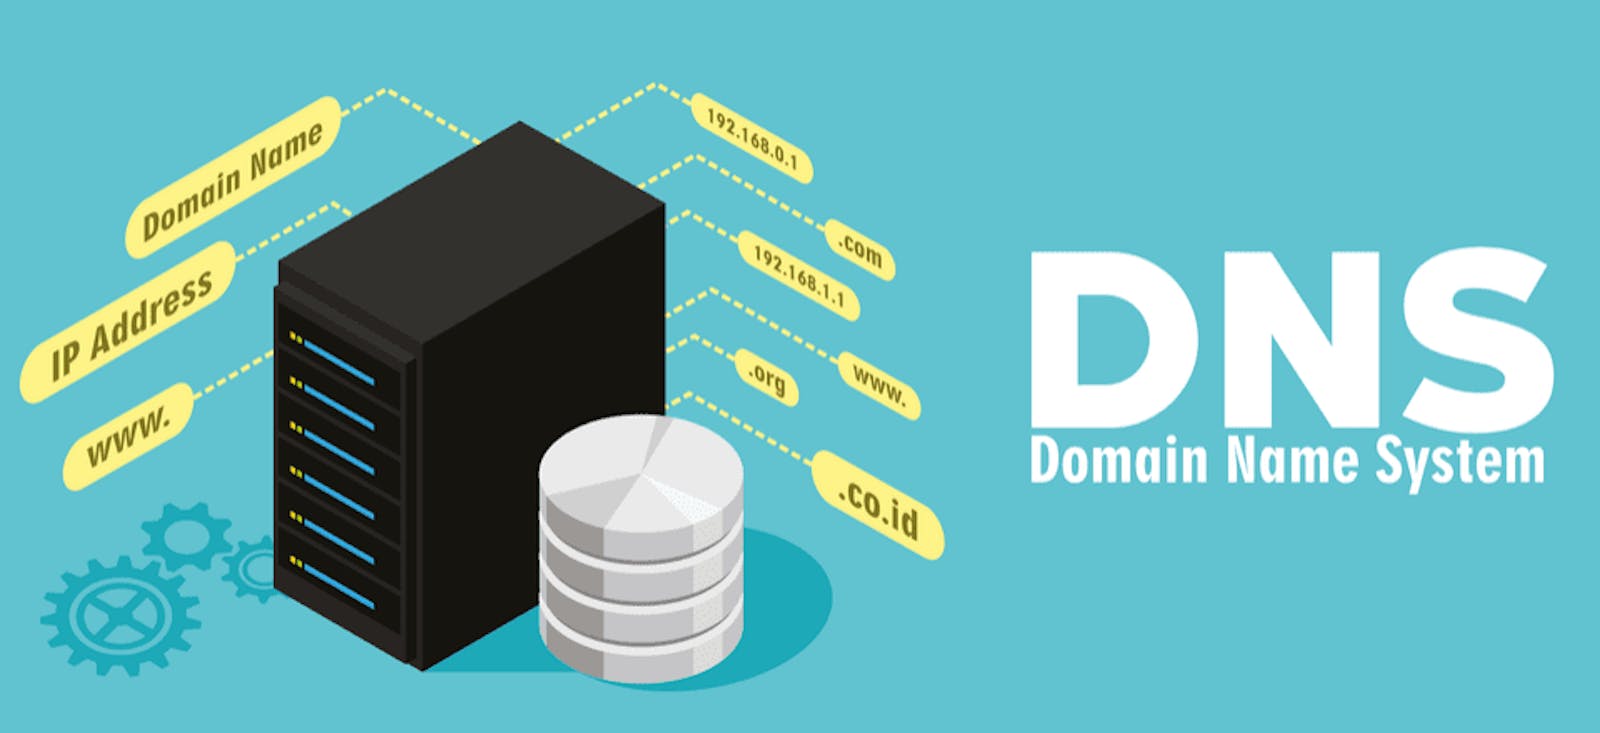 What is DNS and how does it Works?